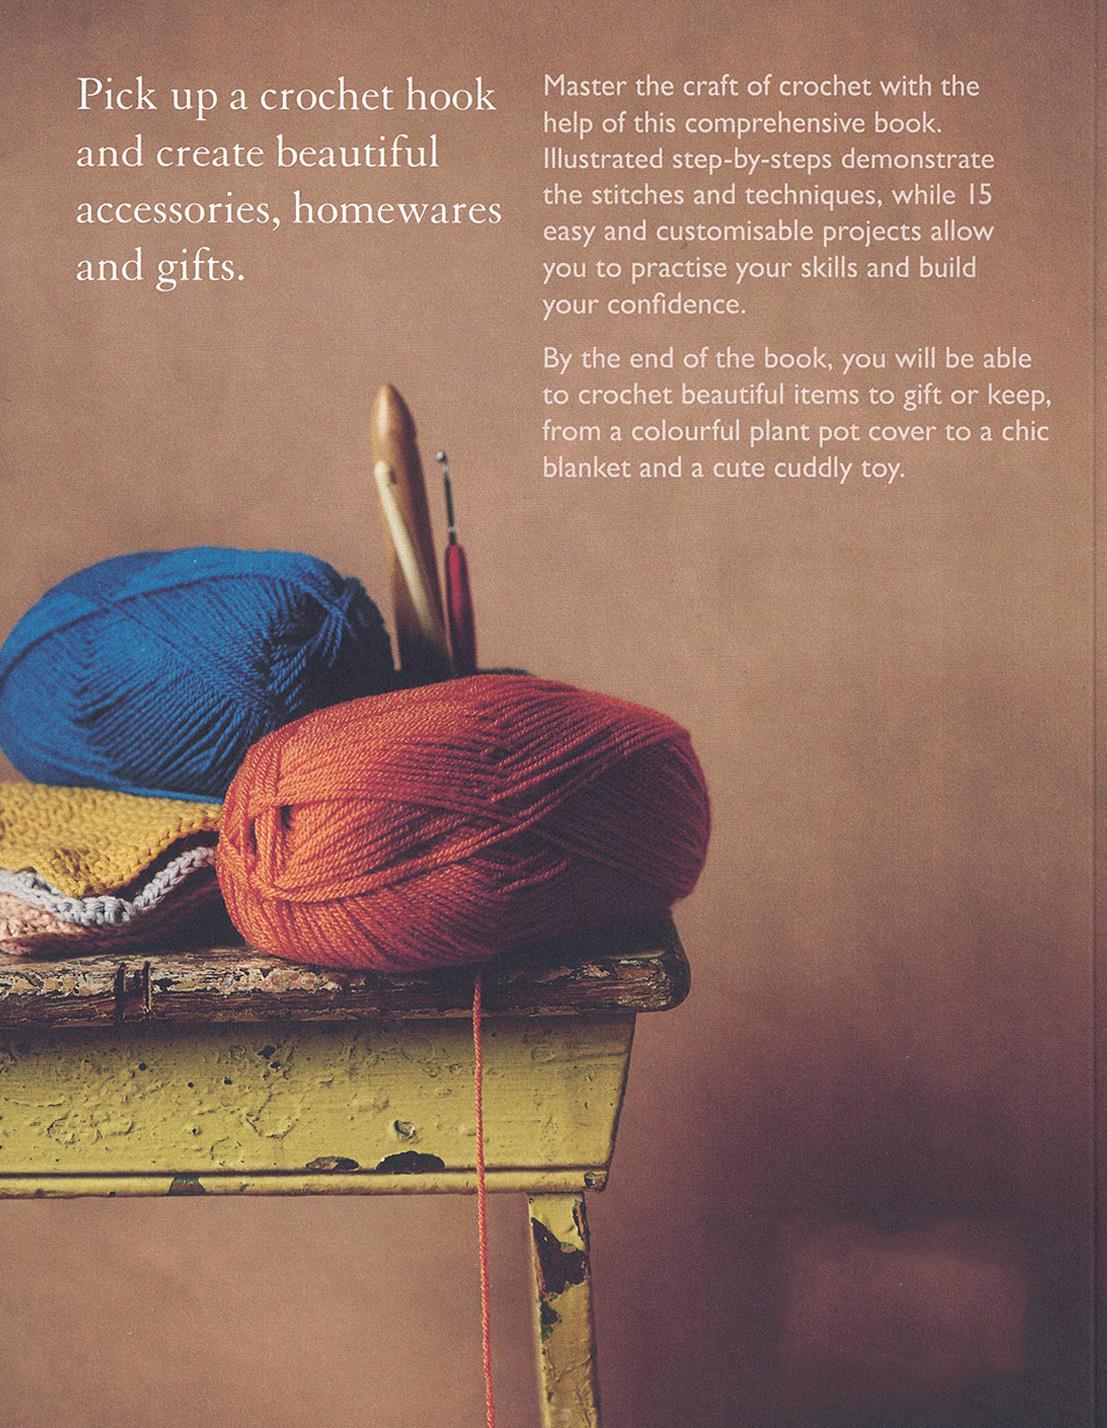 You Will Be Able to Crochet By The End Of This Book - by Zoe Bateman